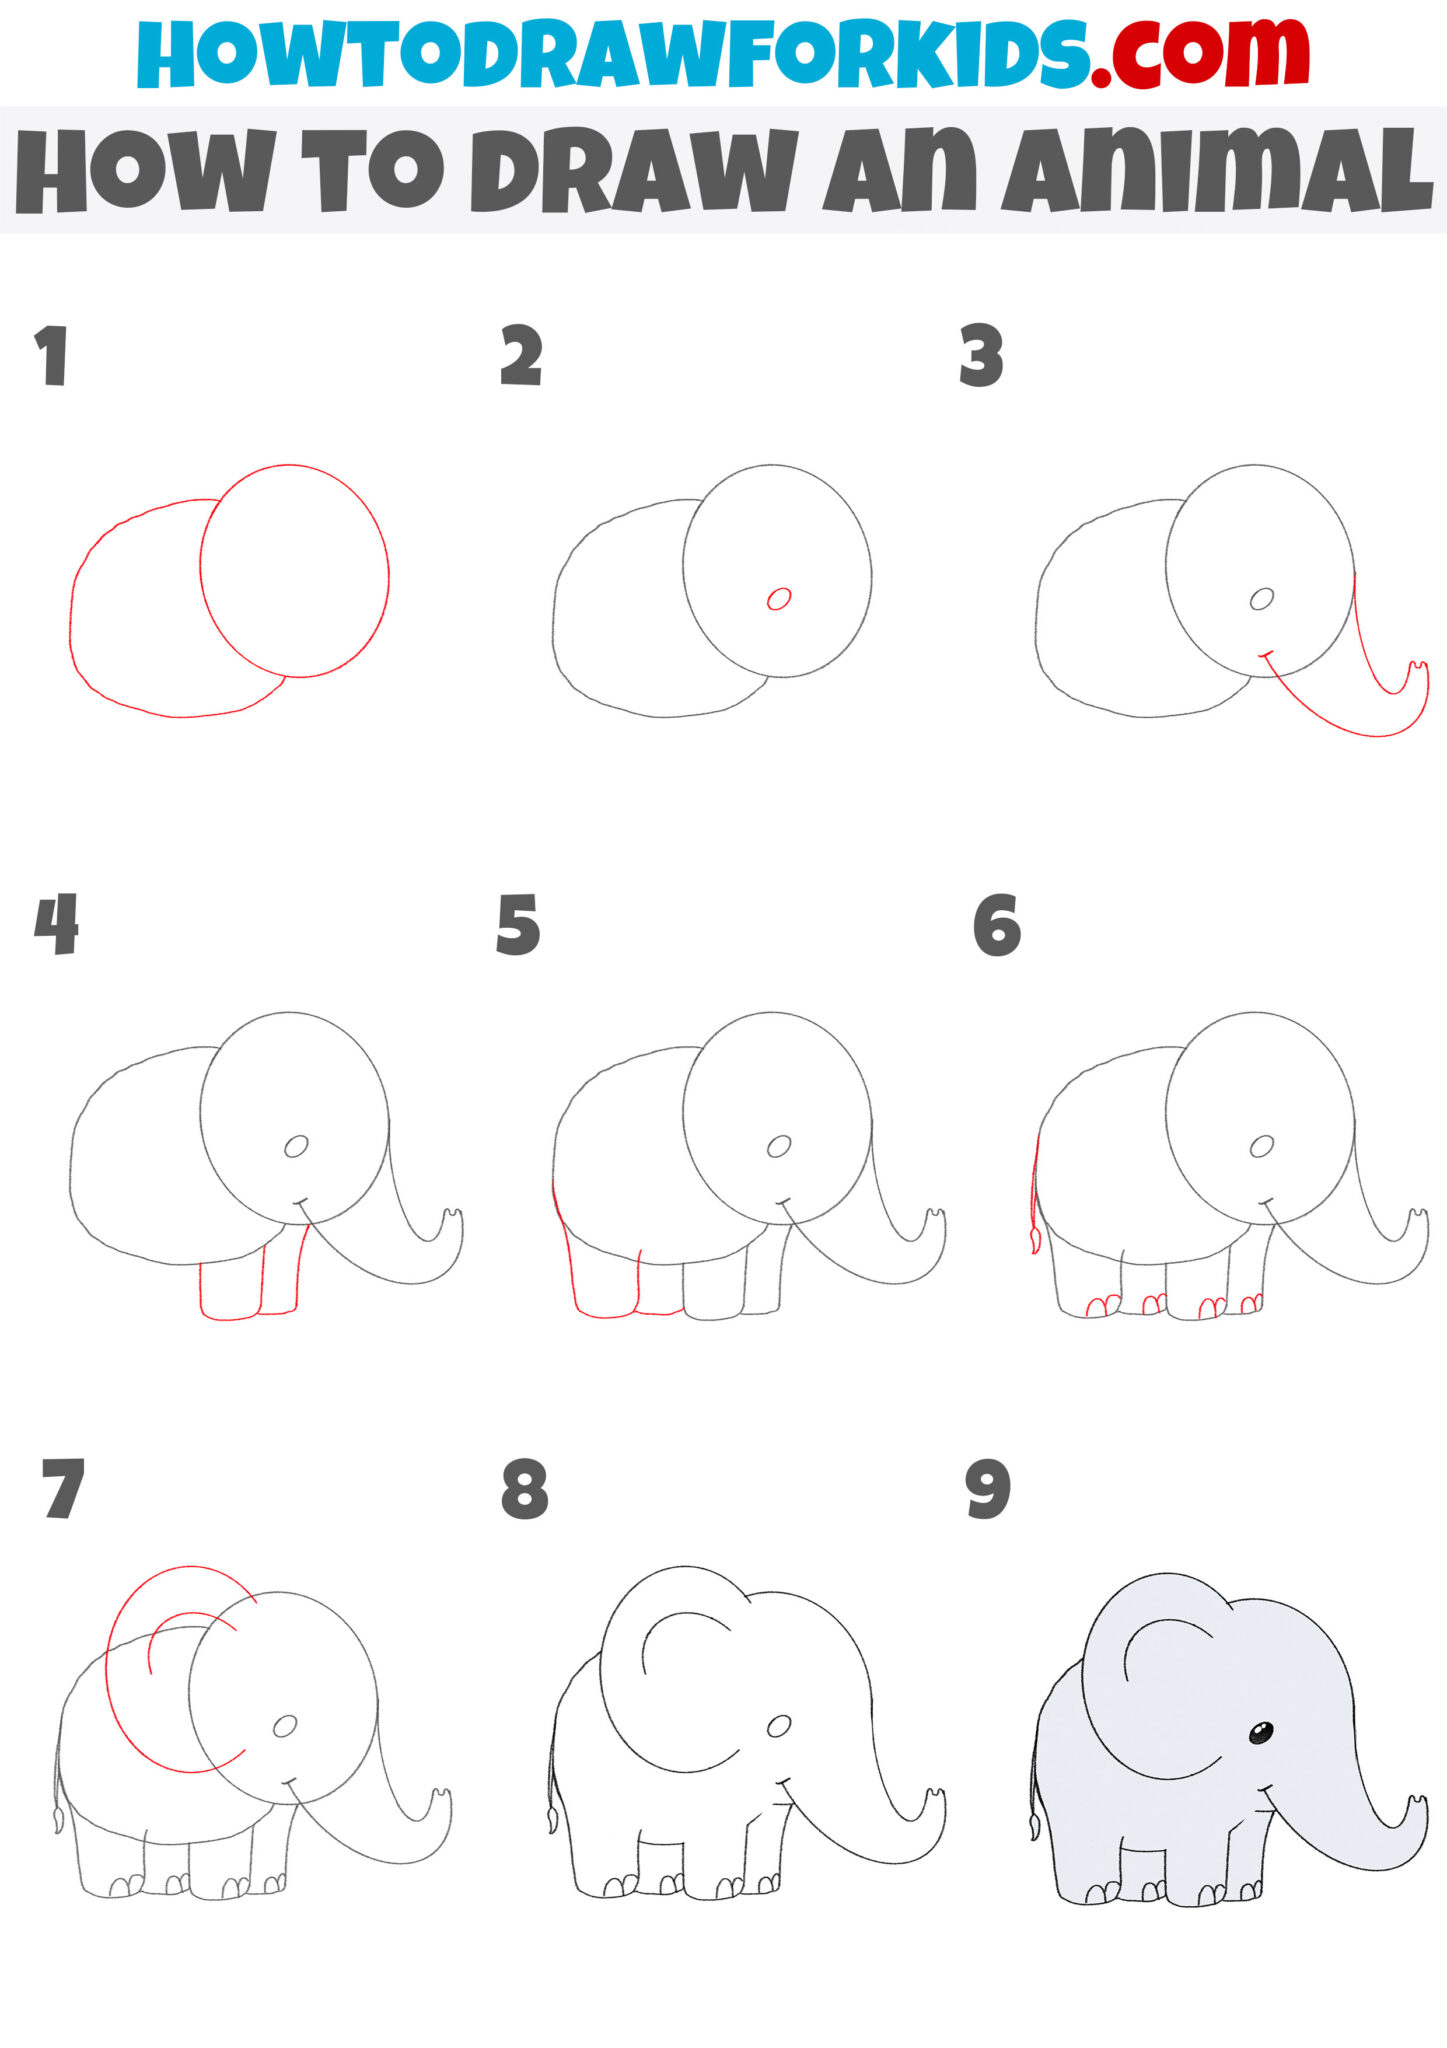 How to Draw an Animal Step by Step - Easy Drawing Tutorial For Kids